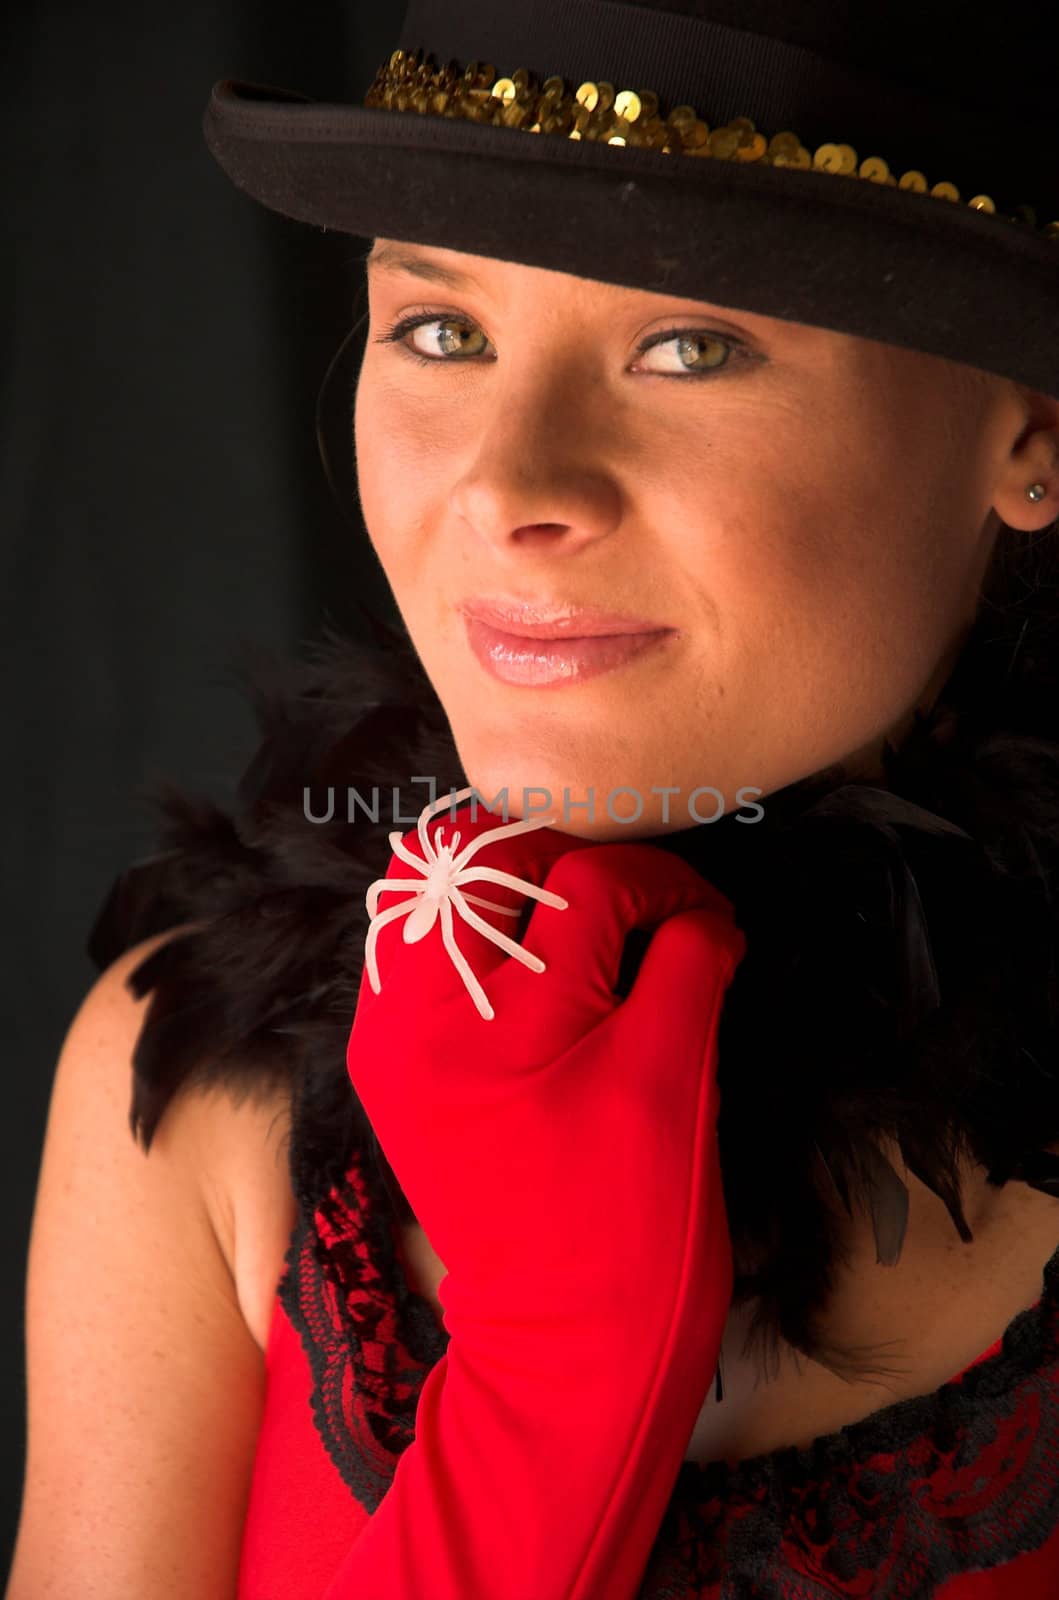 Moulin Rouge model with hat and red gloves holding hat on head with gold band and white ring spider